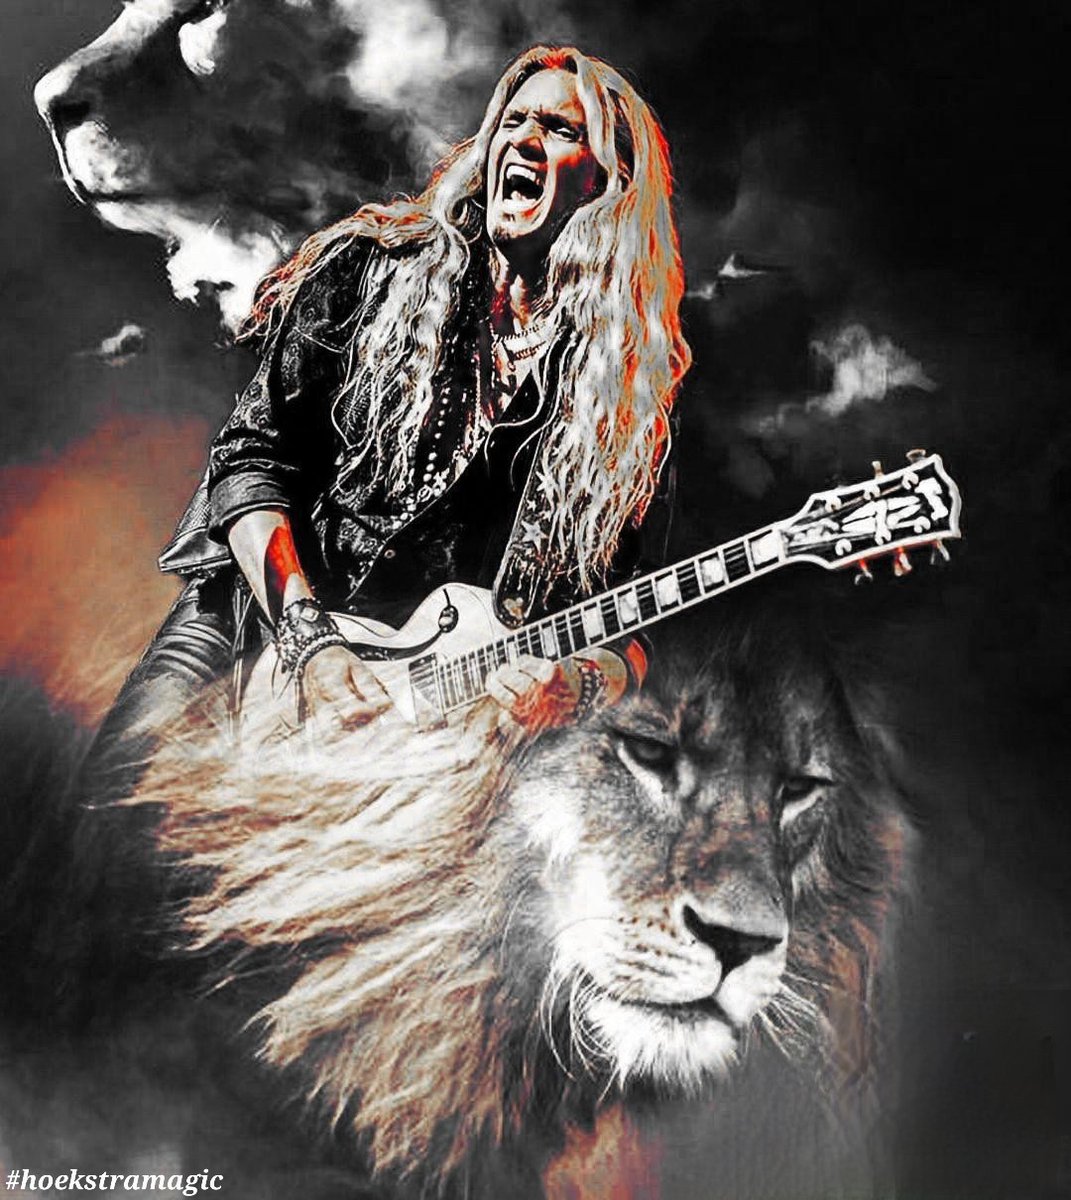 Week in @joelhoekstra13 songs! Tune for Monday I thought appropriate.. #KillOrBeKilled from #DyingToLive album! Have a happy new week #hoekstraheads Go get 'em and don't take anyone's.. you know what 😉🎶🎸❤️🤟
youtu.be/DsRCQDVQX7I